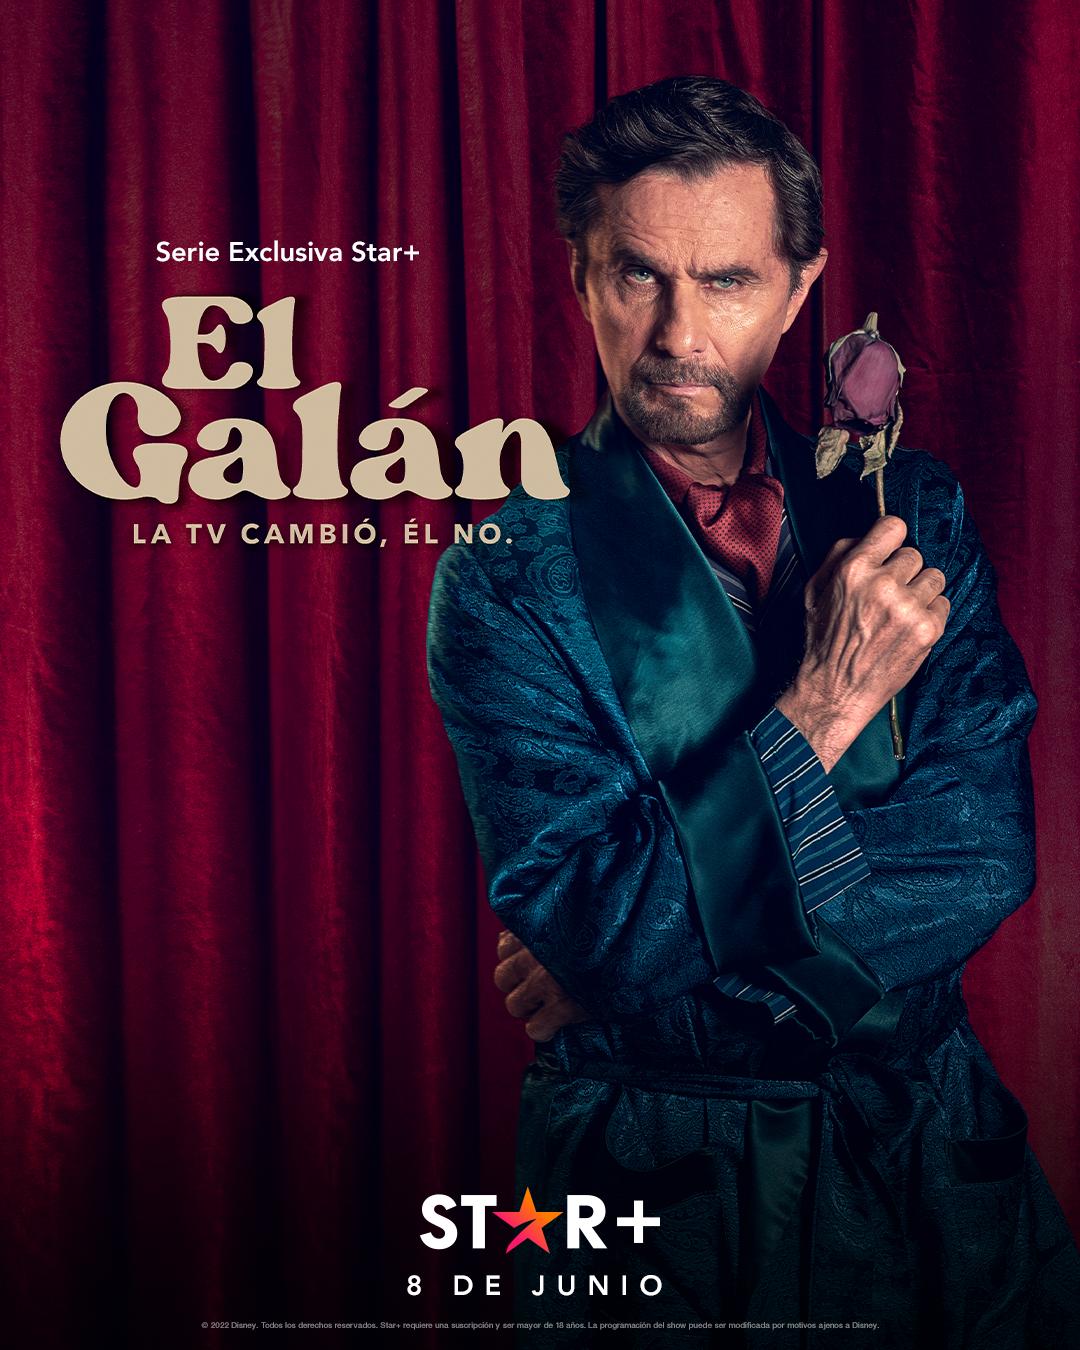 TV ratings for The Gallant. TV Changed, He Didn't (El Galán. La Tv Cambió, Él No) in Chile. Star+ TV series